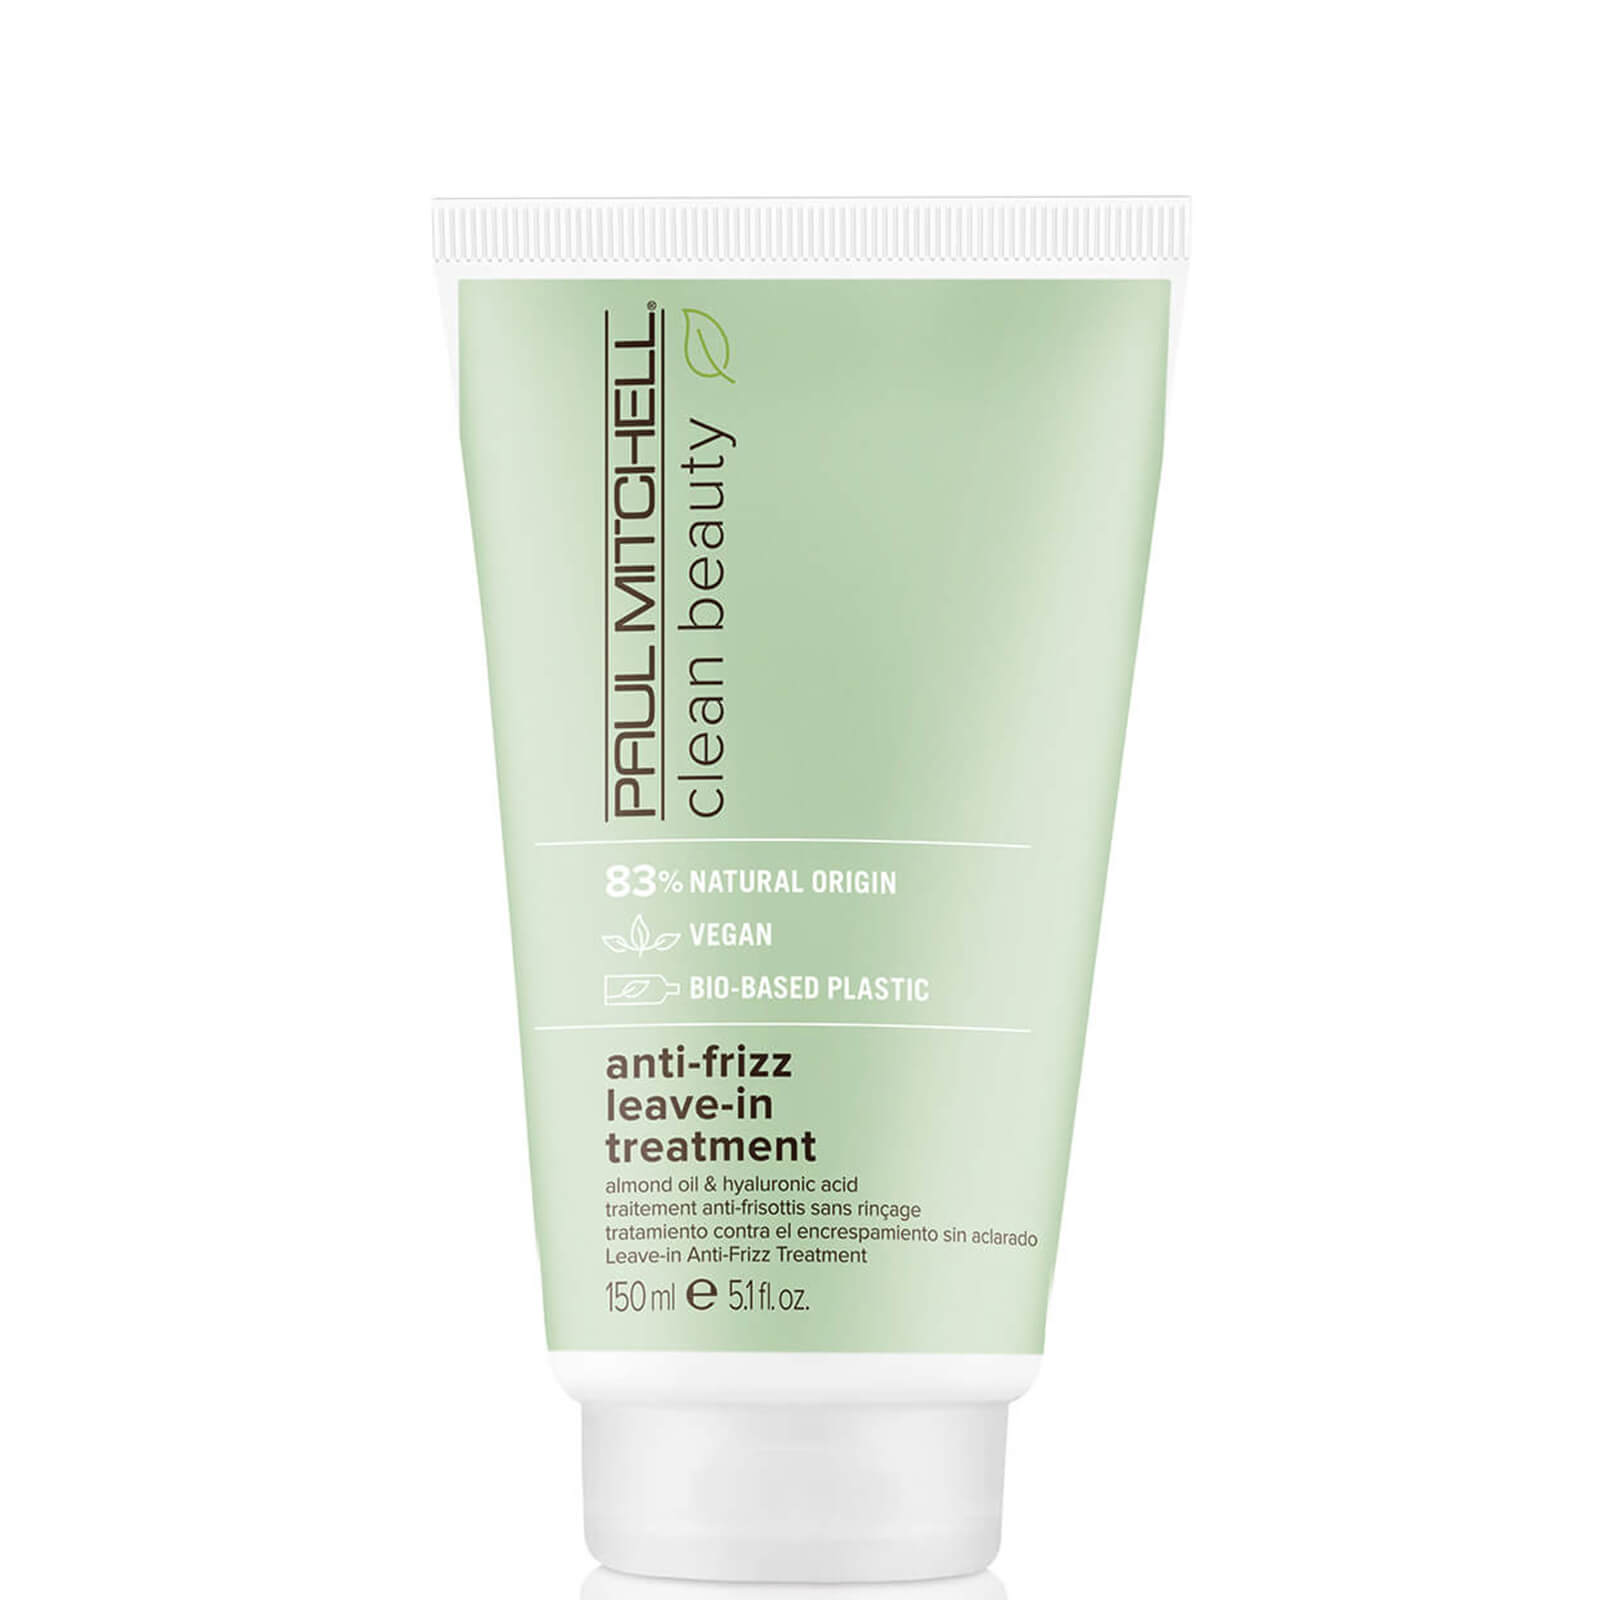 Image of Paul Mitchell Clean Beauty Anti-Frizz Leave in Conditioner 150ml